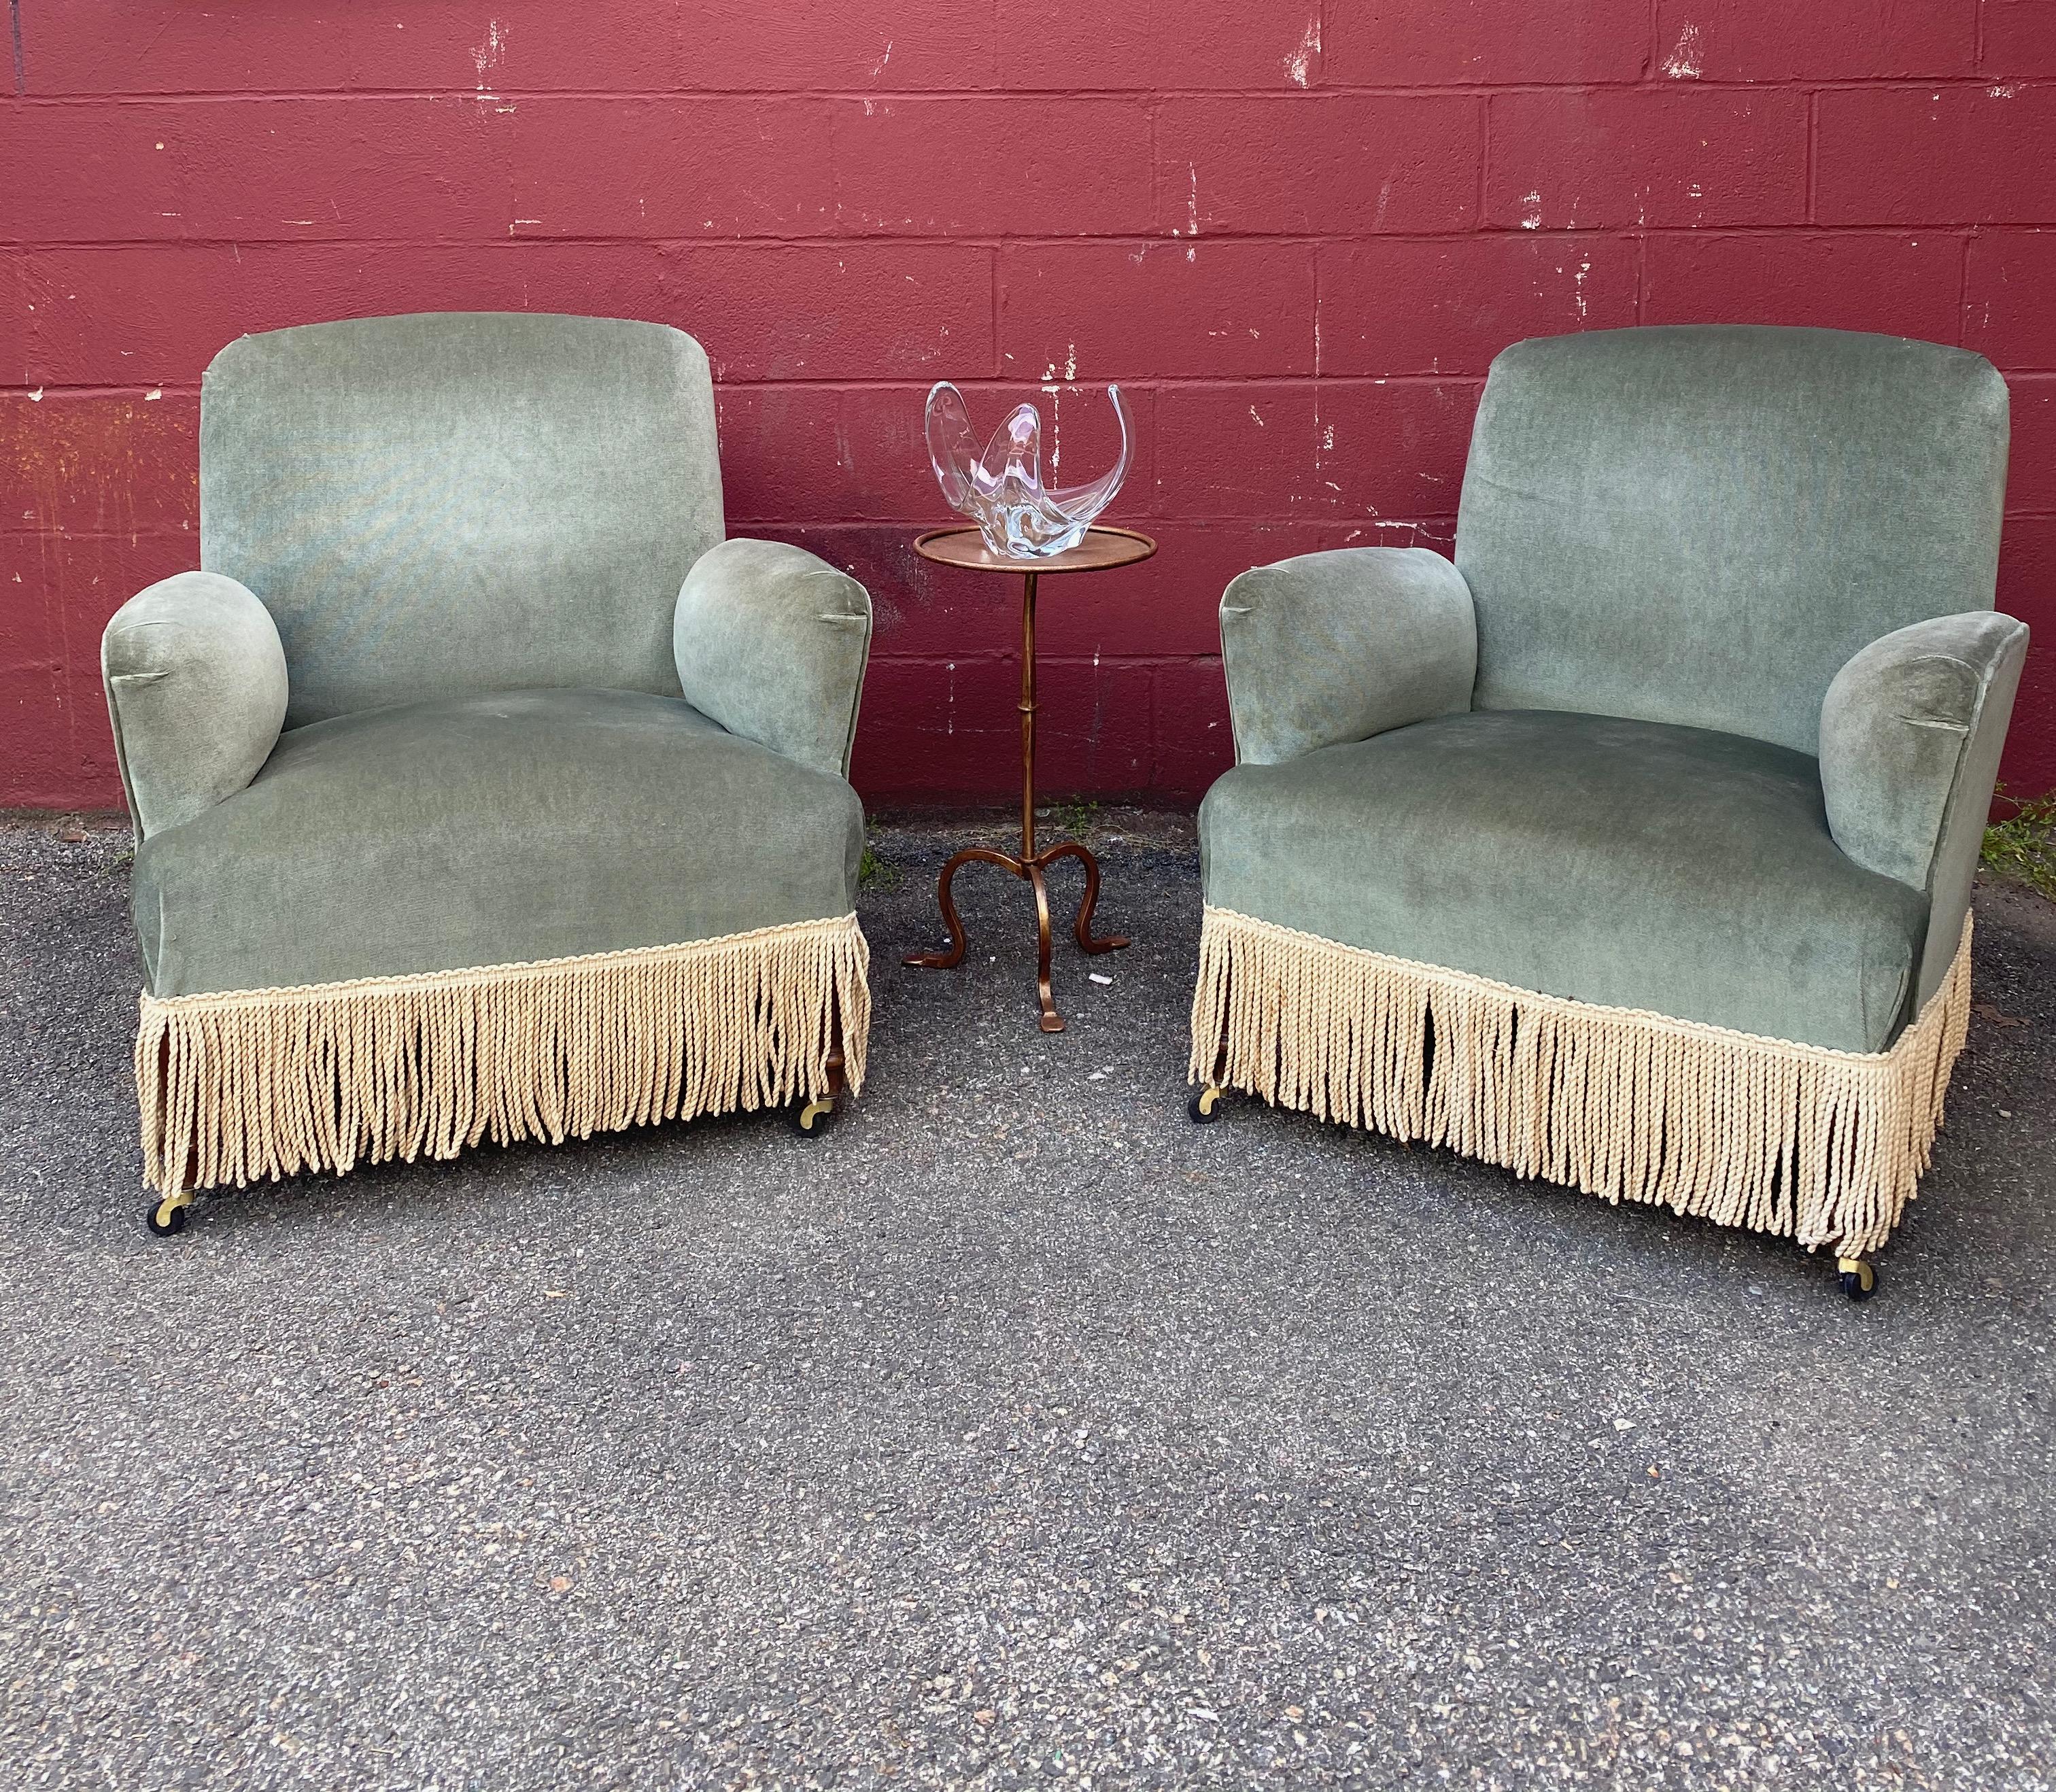 An unusual pair of French Napoleon III armchairs that are upholstered in green velvet with contrasting bullion fringe. The arms are made to appear to be detachable although they are attached. The fabric is not new and shows signs of use. We have